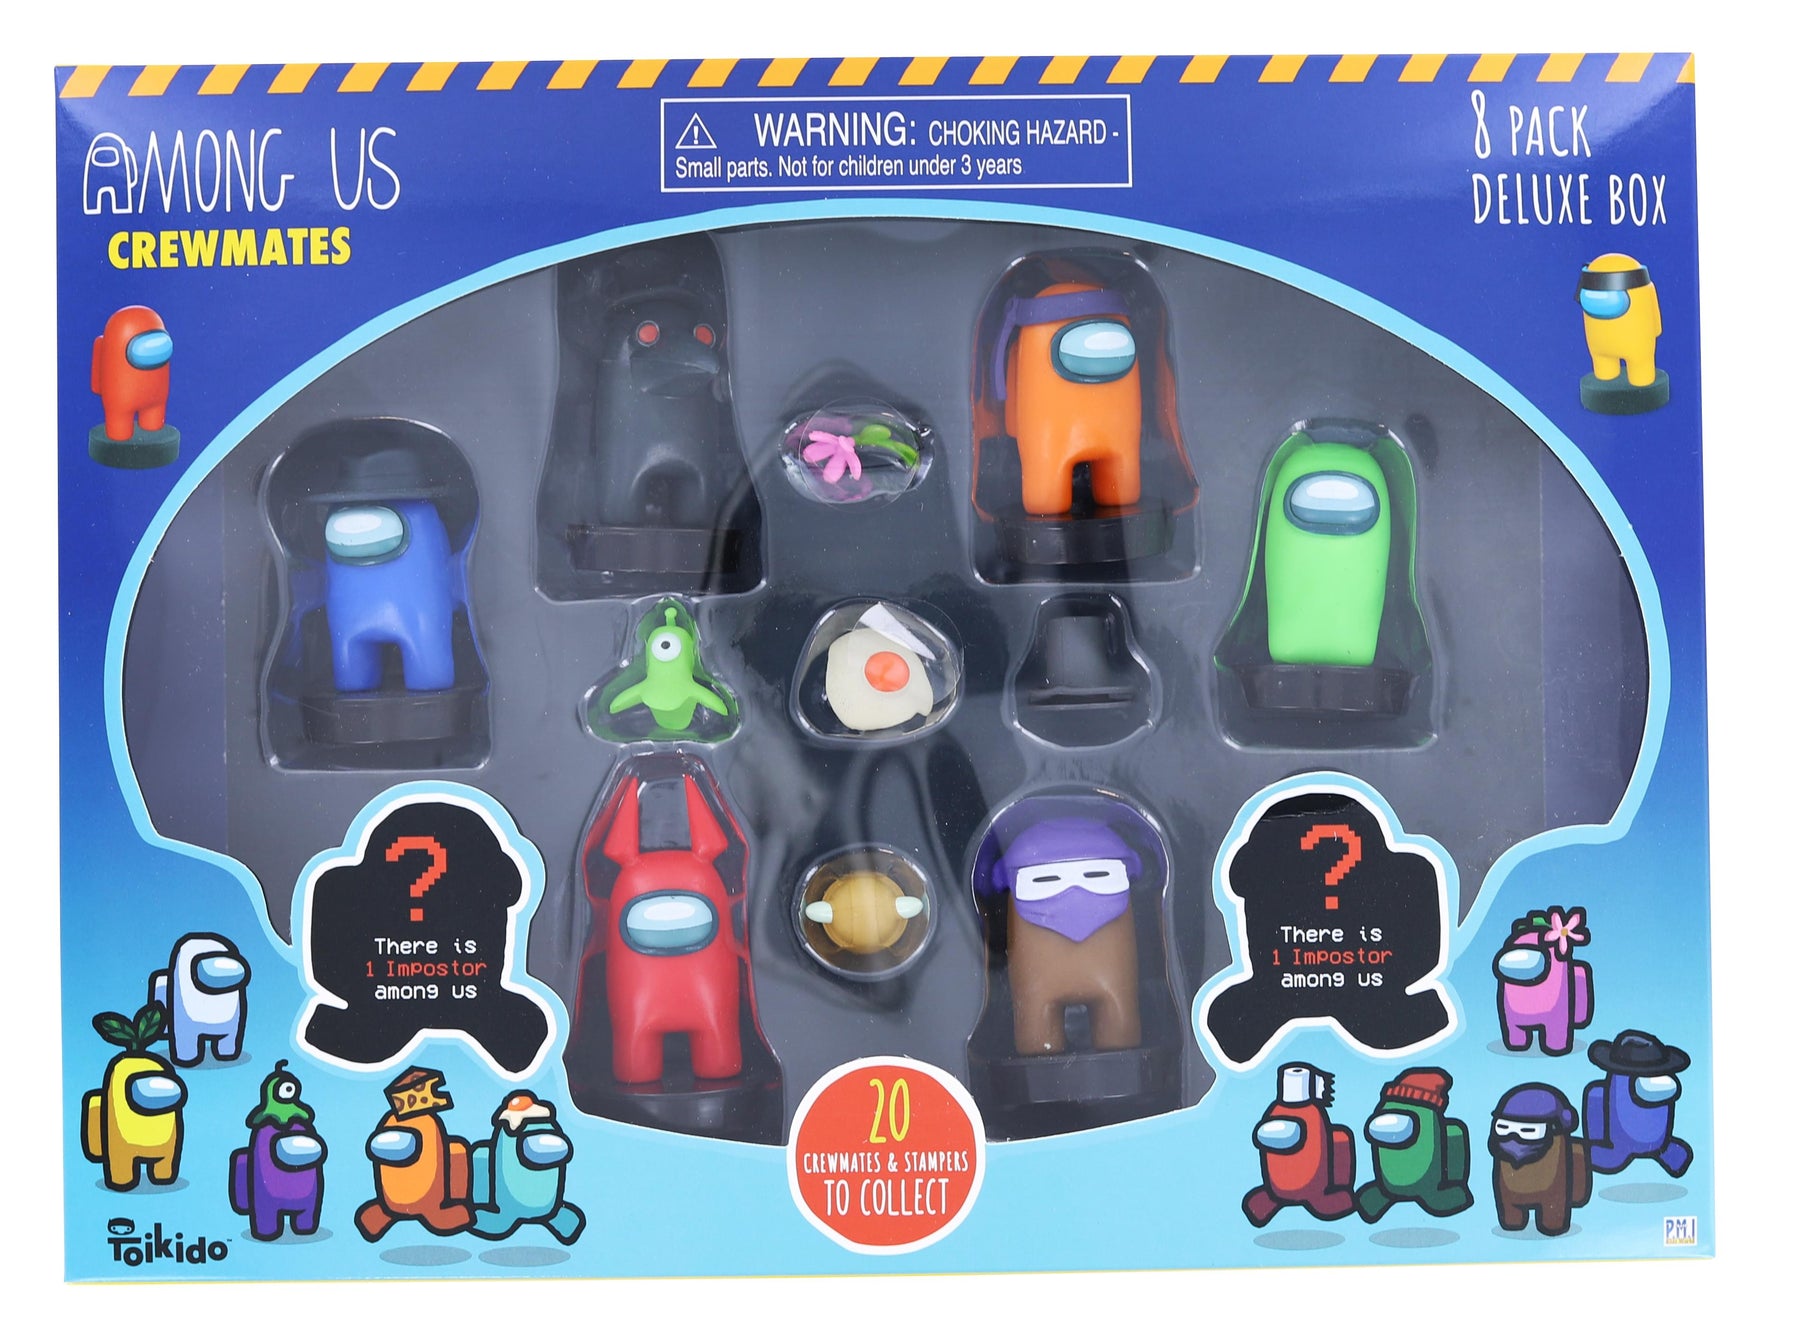 Among Us Crewmate Stampers 8 Pack Deluxe Box Set | 8 Random Figures